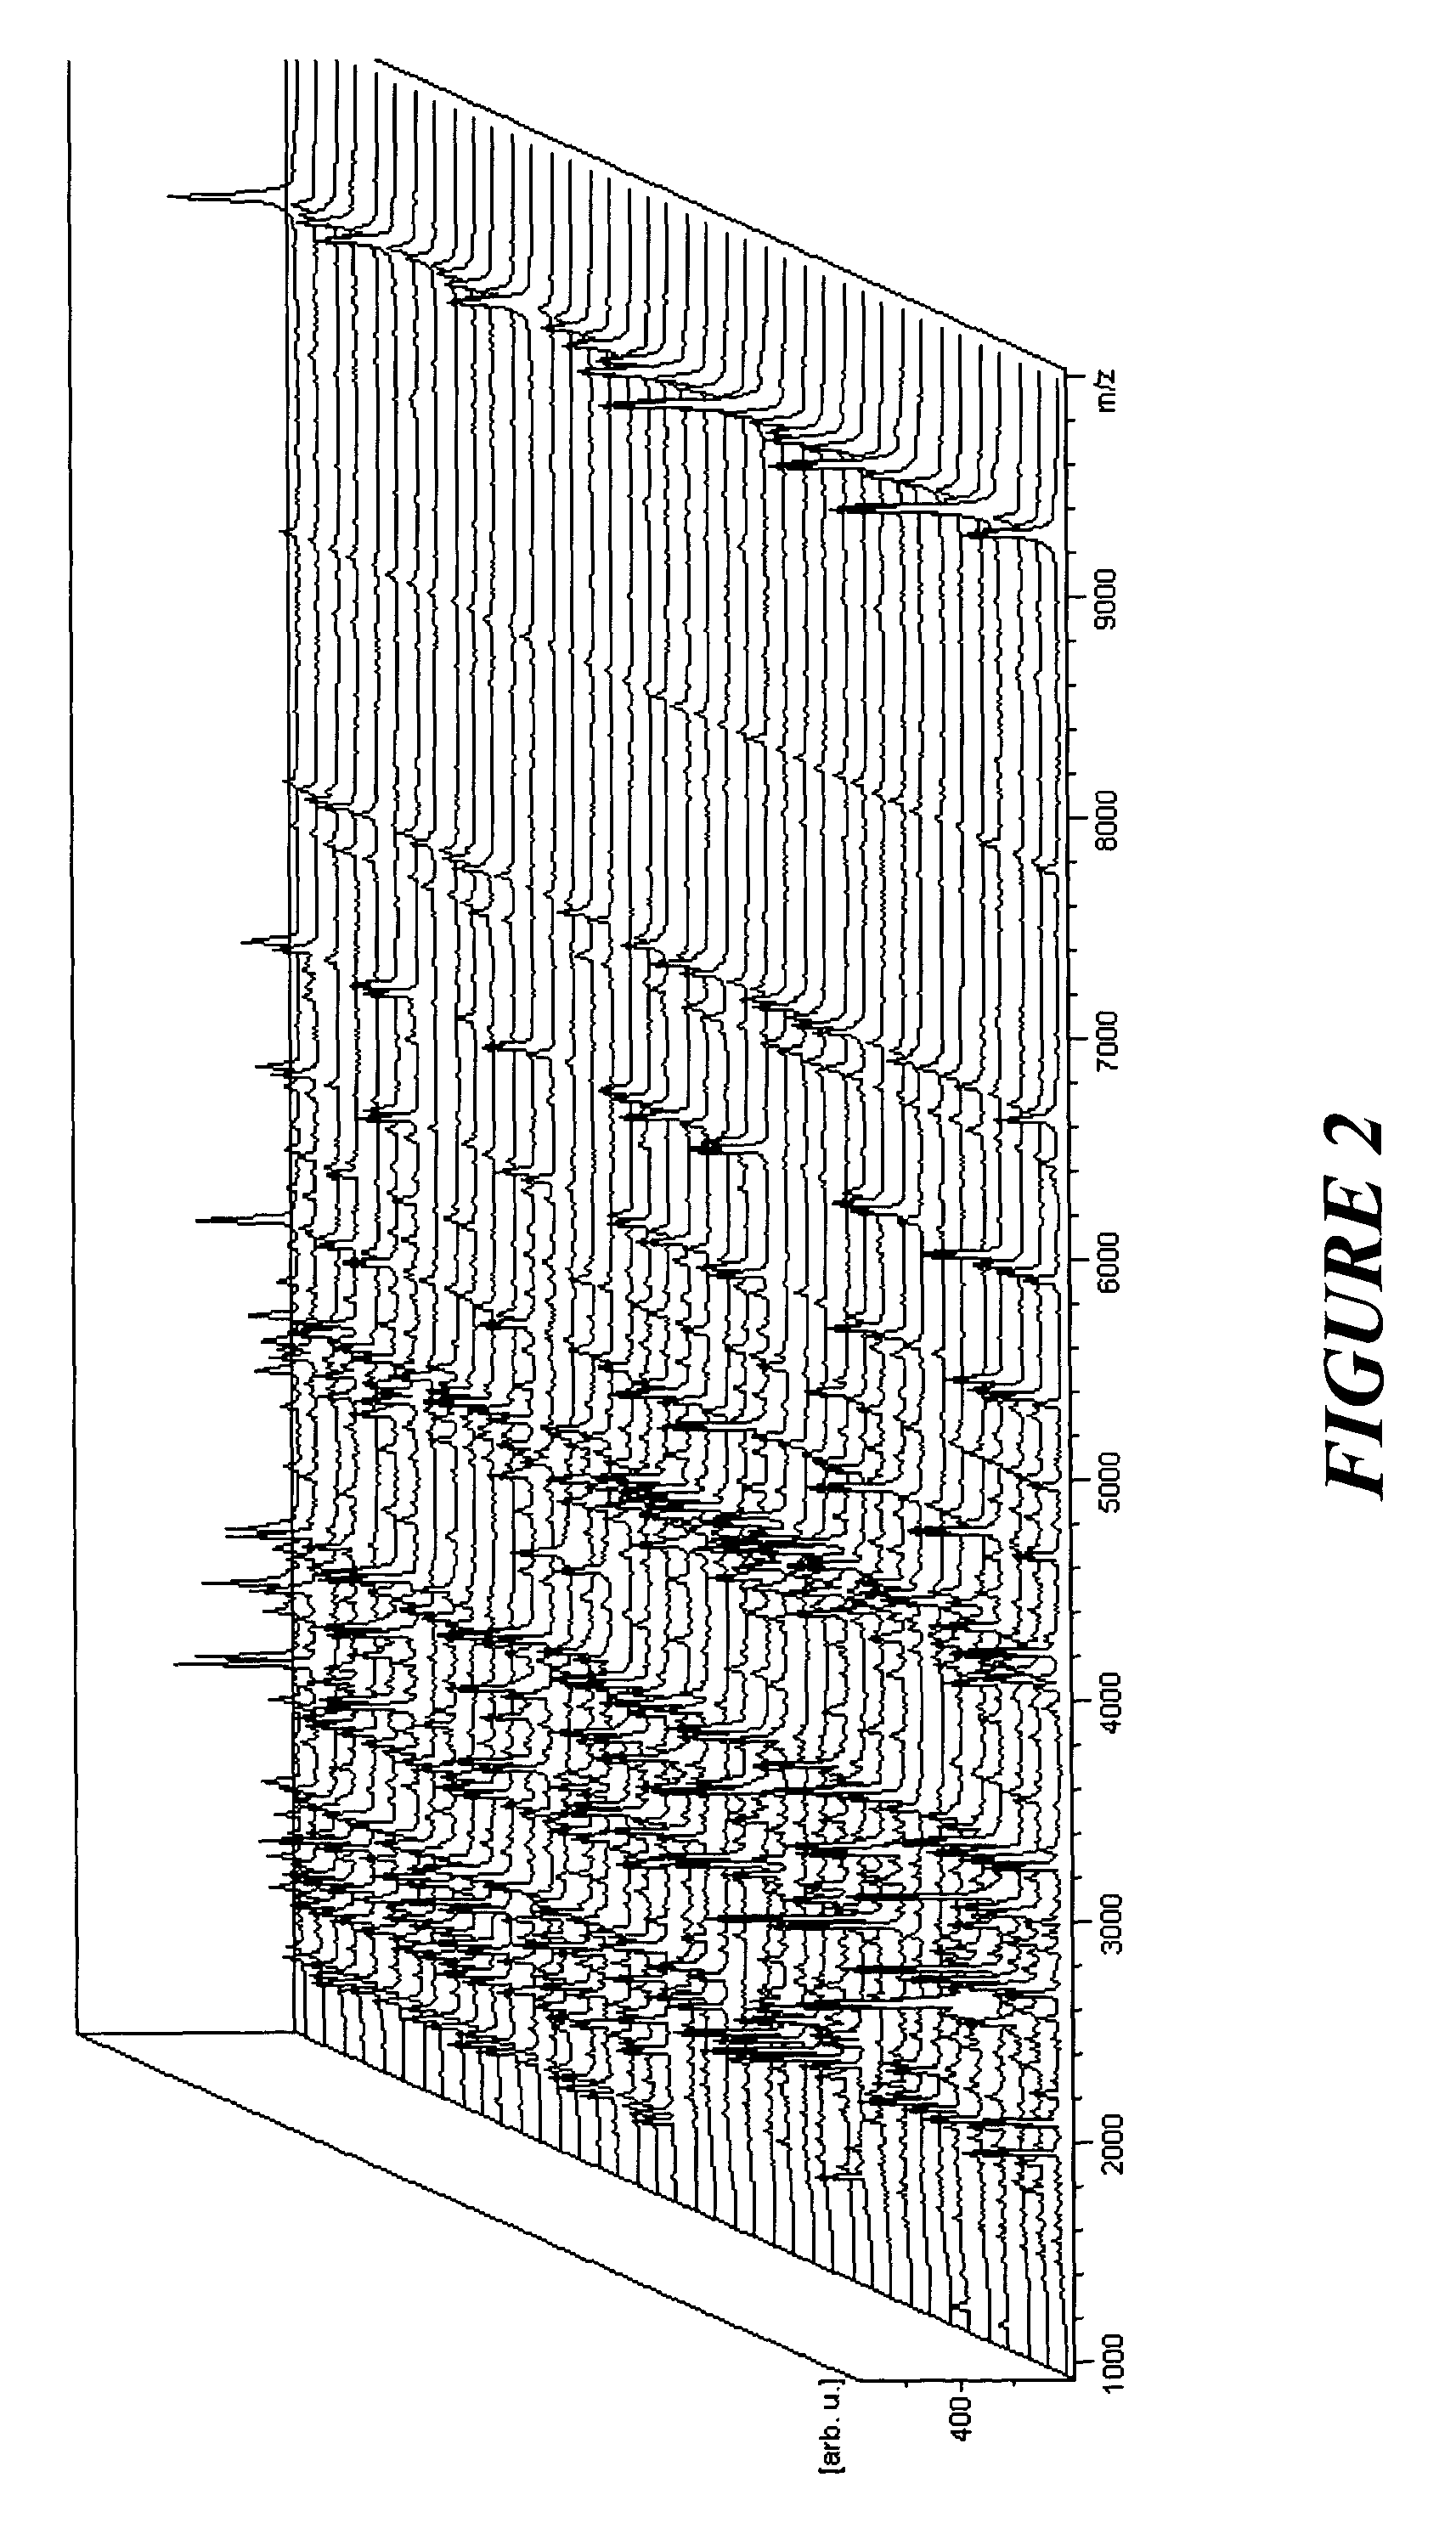 Graphical displaying of and pattern recognition in analytical data strings